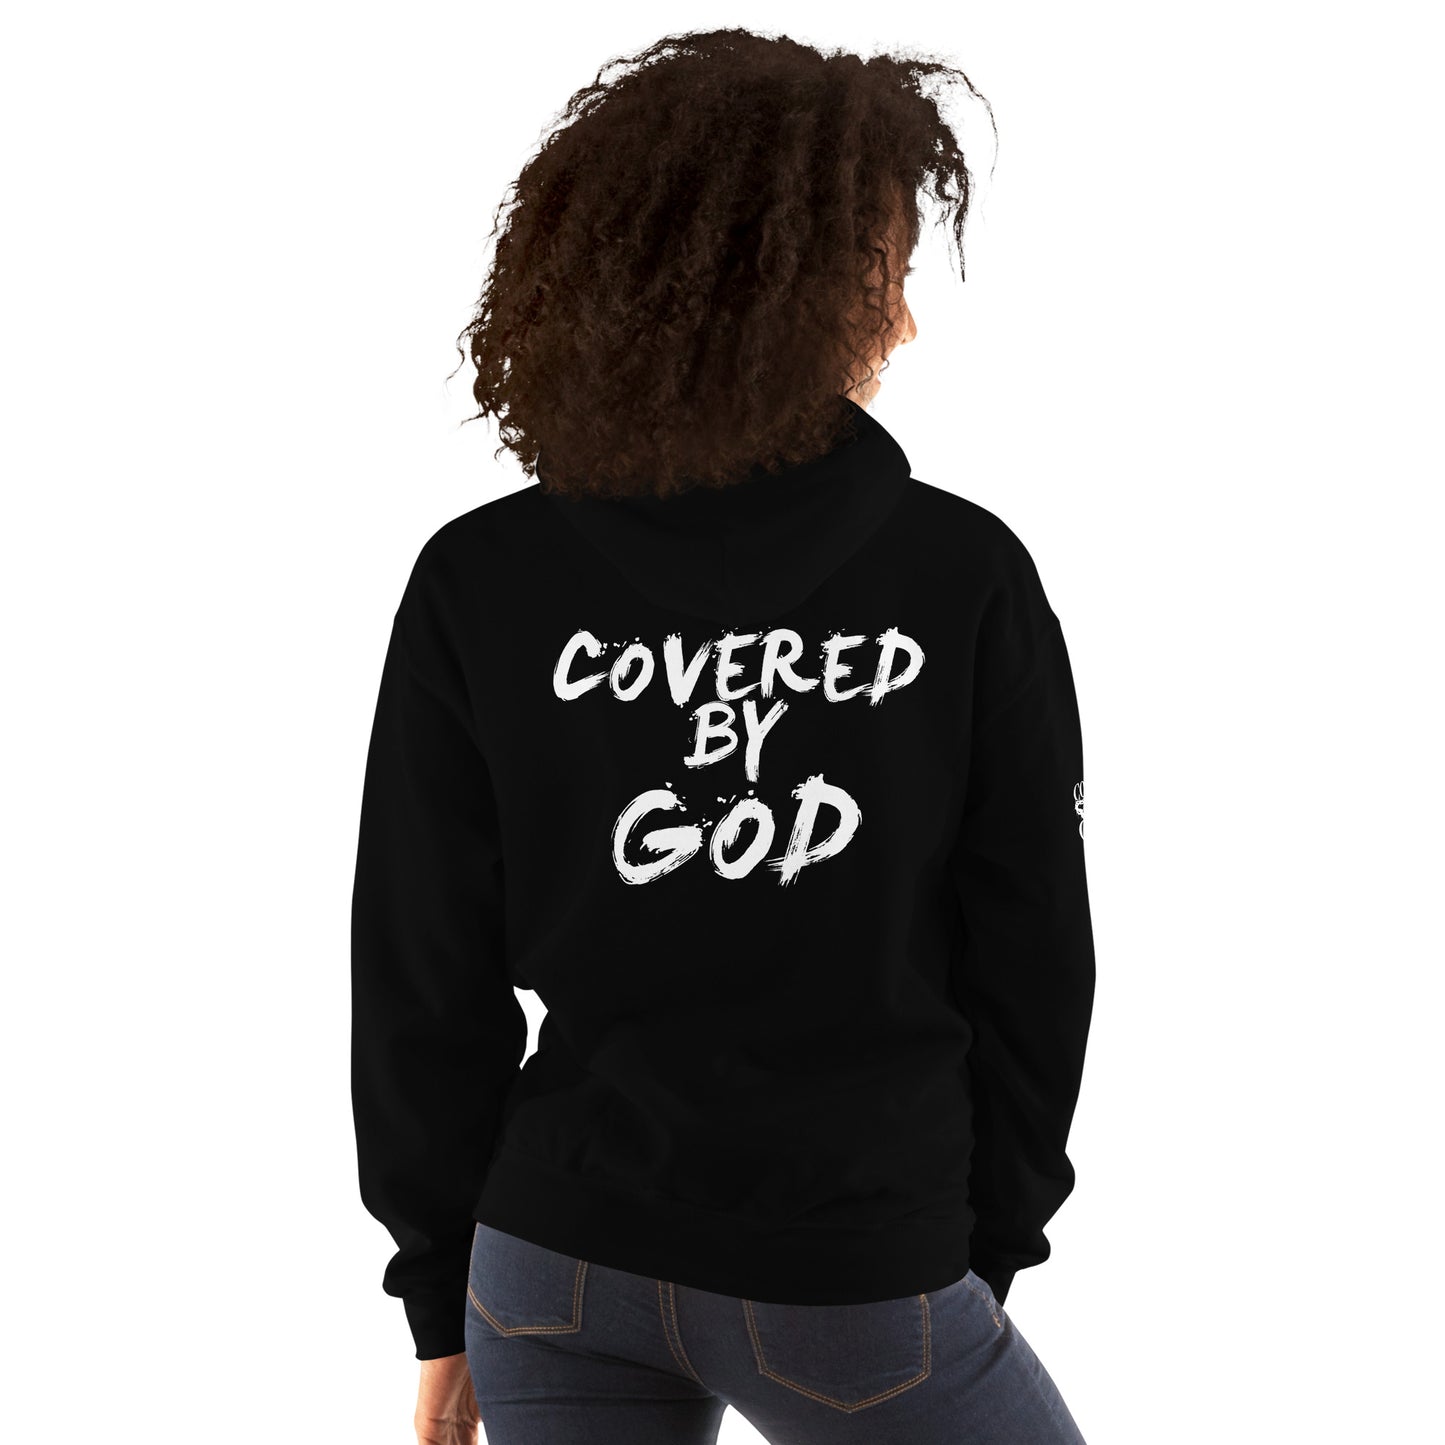 I'm Just Out Here Trusting God Hoodie